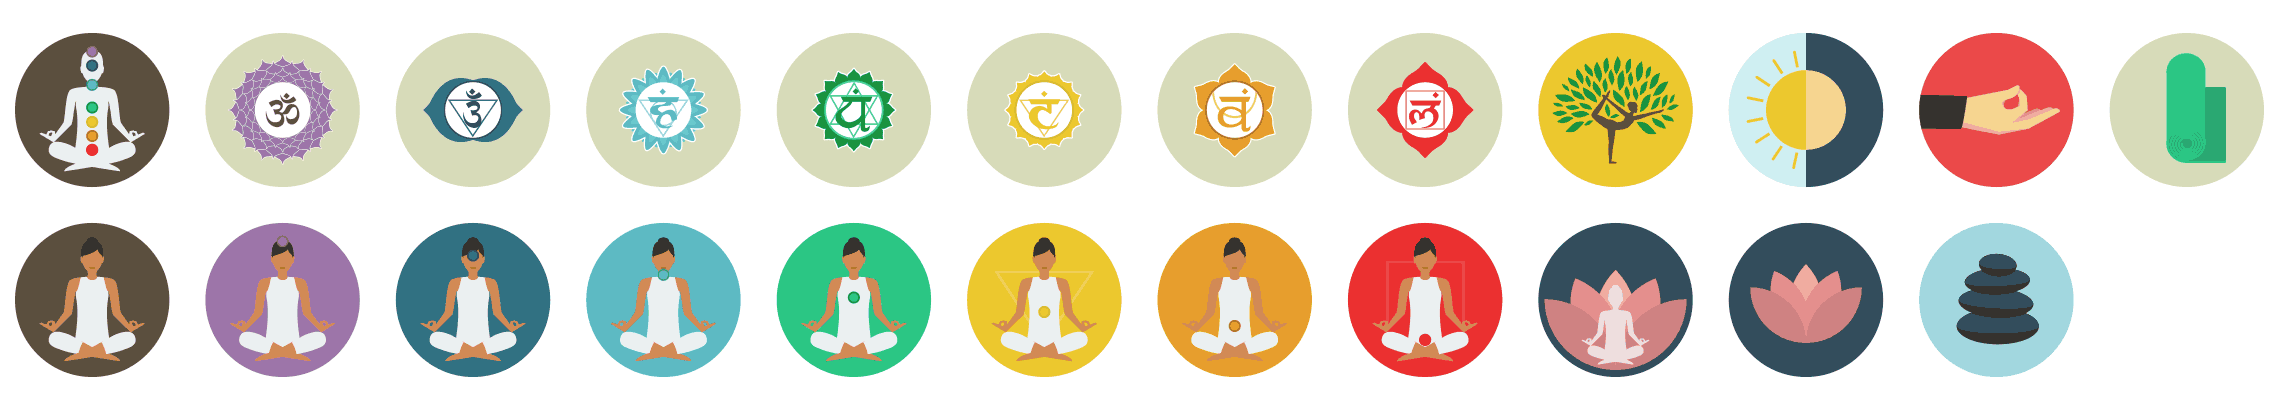 meditation-flat-icons-vol-1-preview